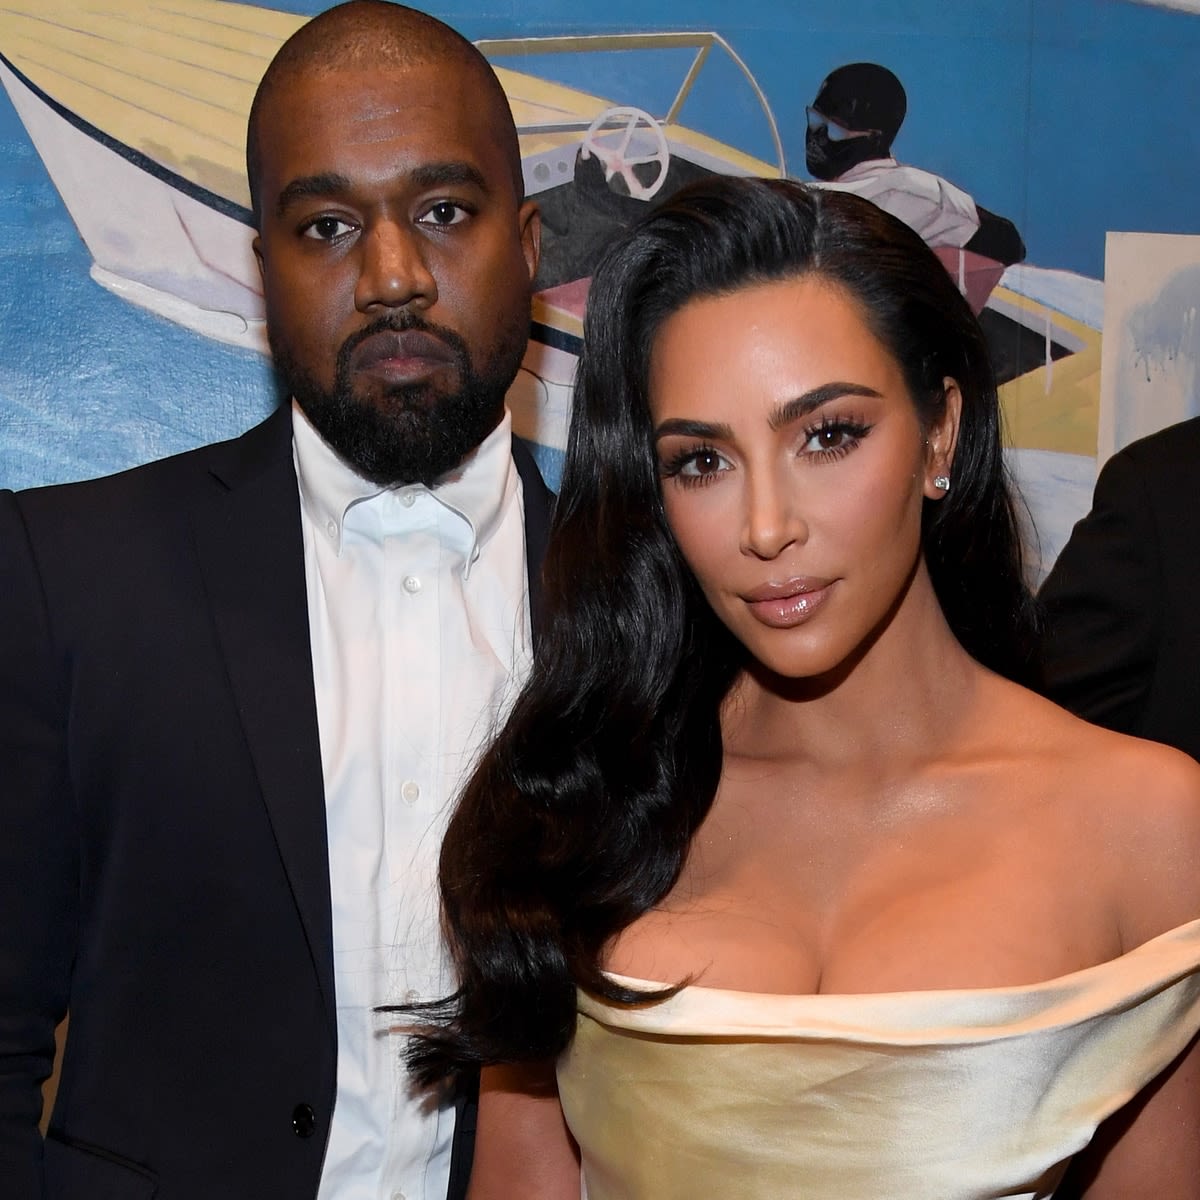 Kim Kardashian and Kanye West’s Son Diagnosed With Rare Skin Condition